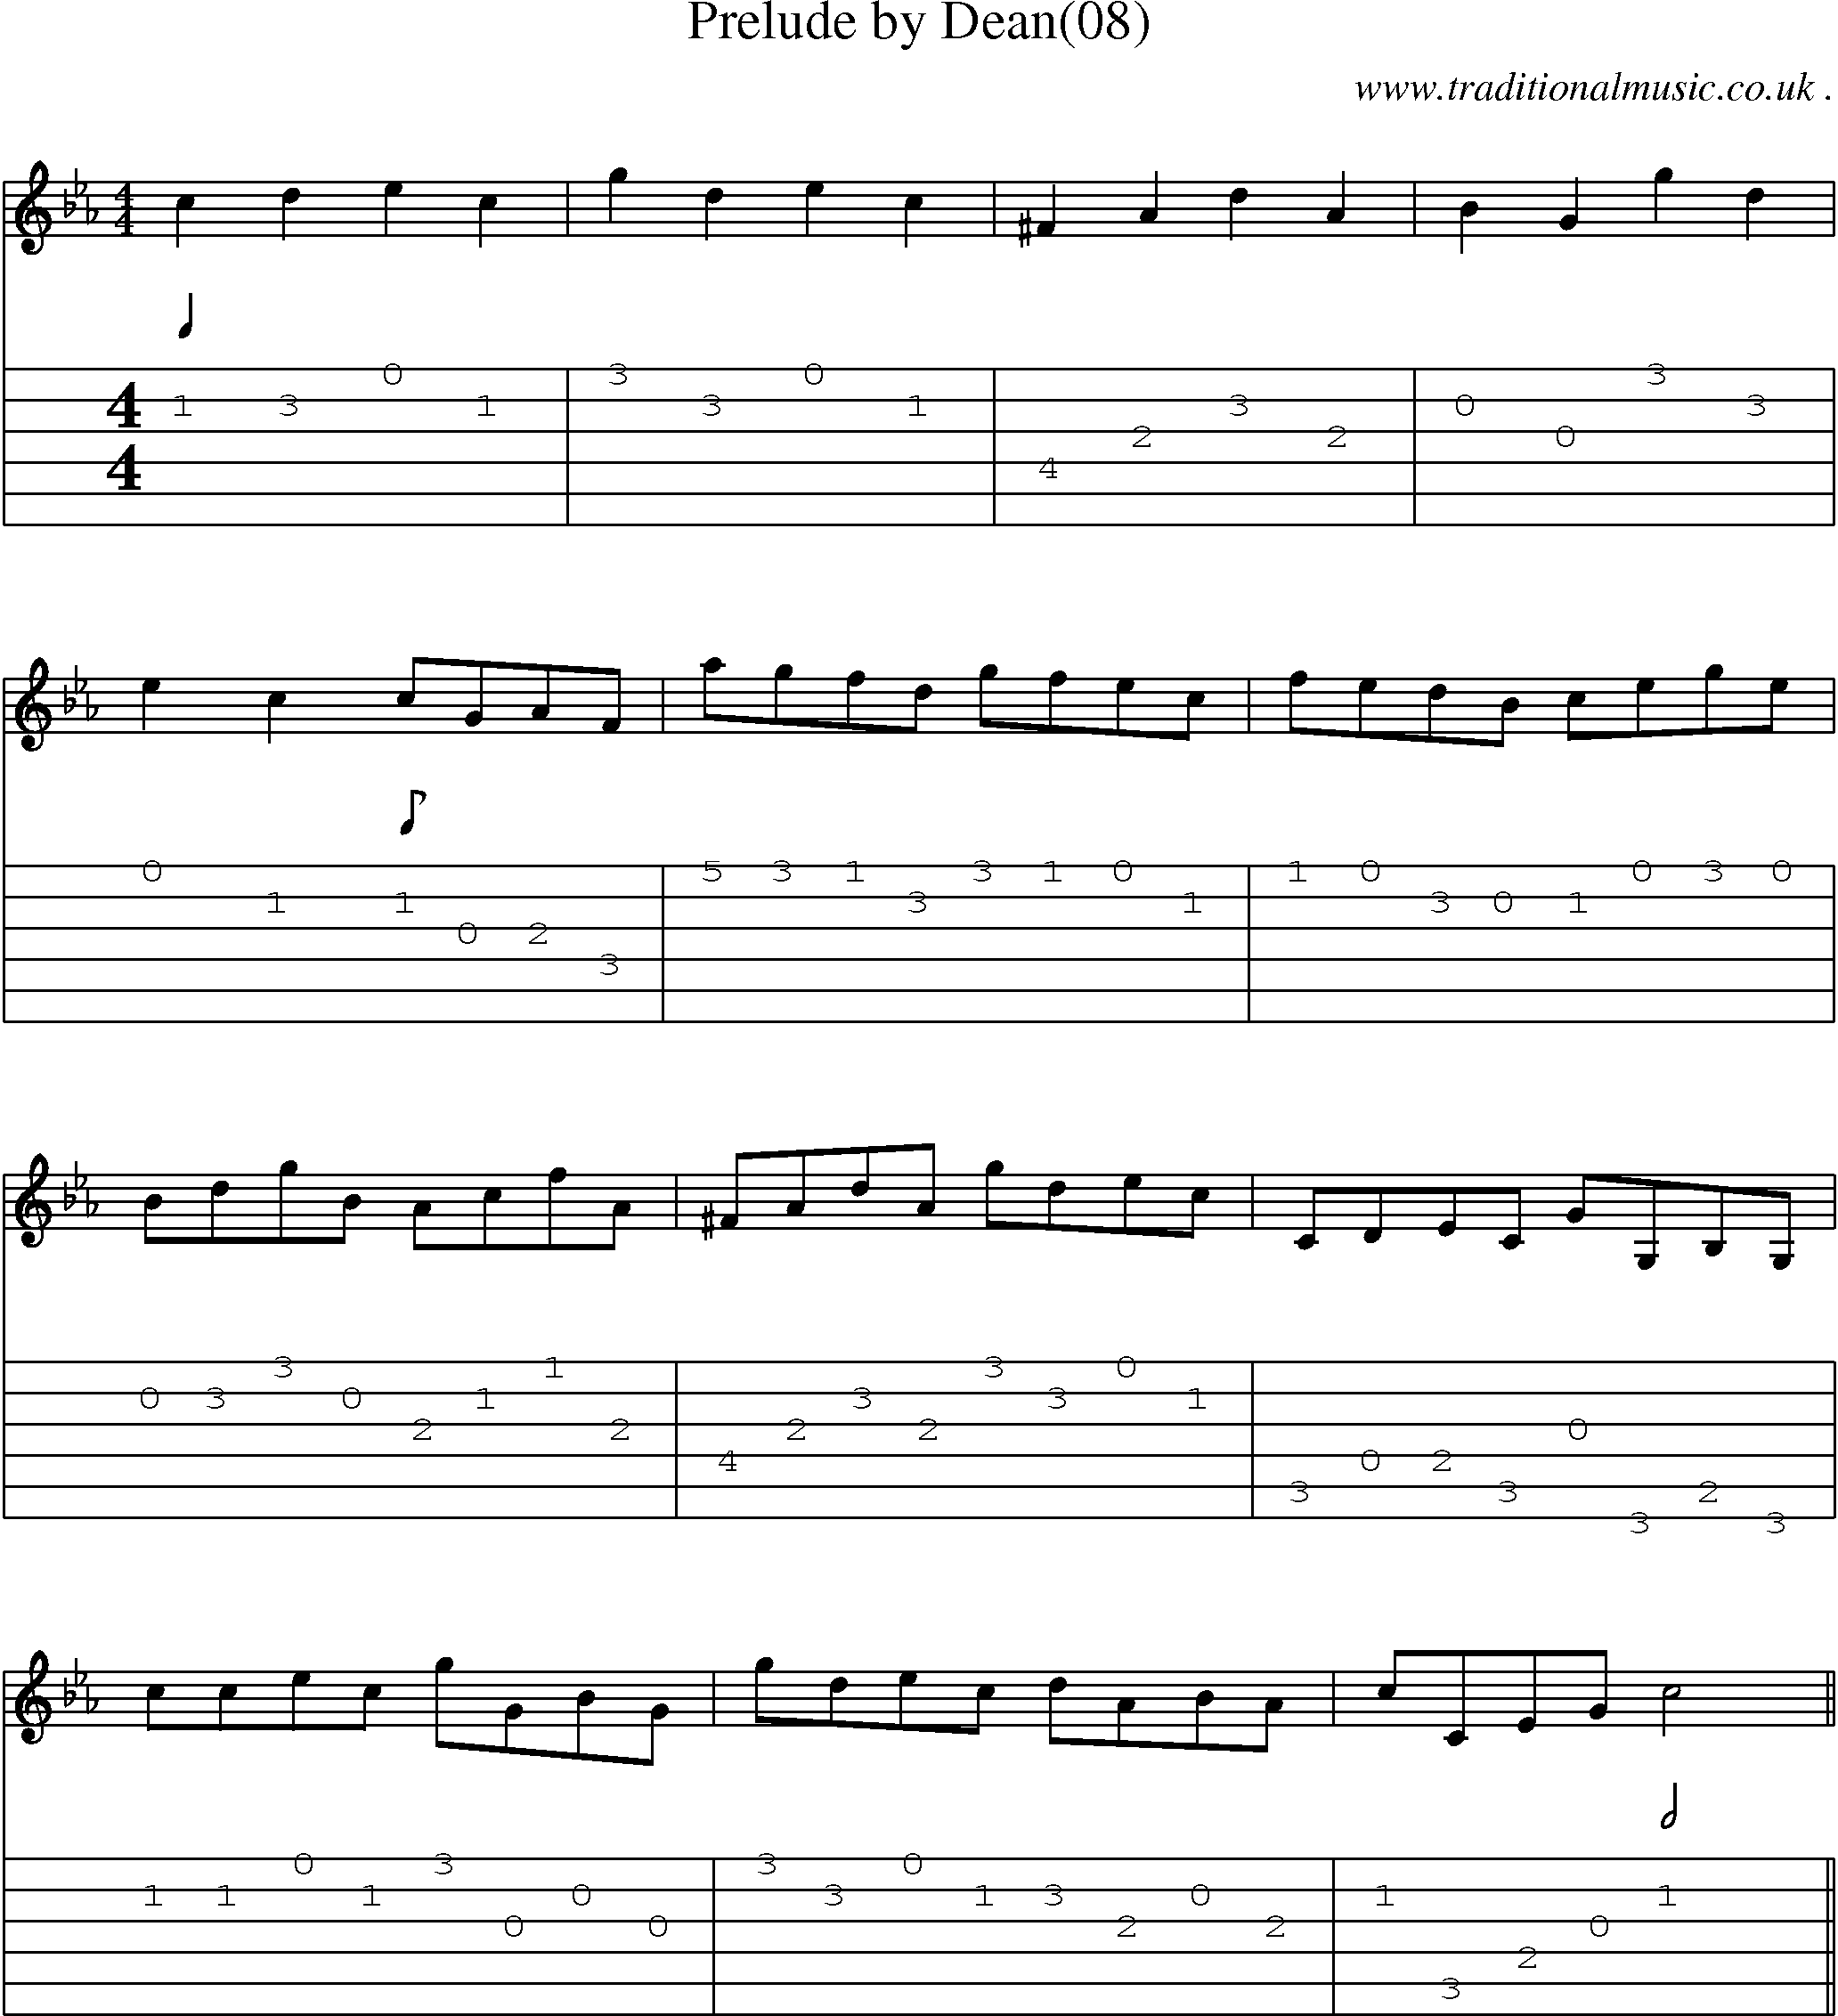 Sheet-Music and Guitar Tabs for Prelude By Dean(08)